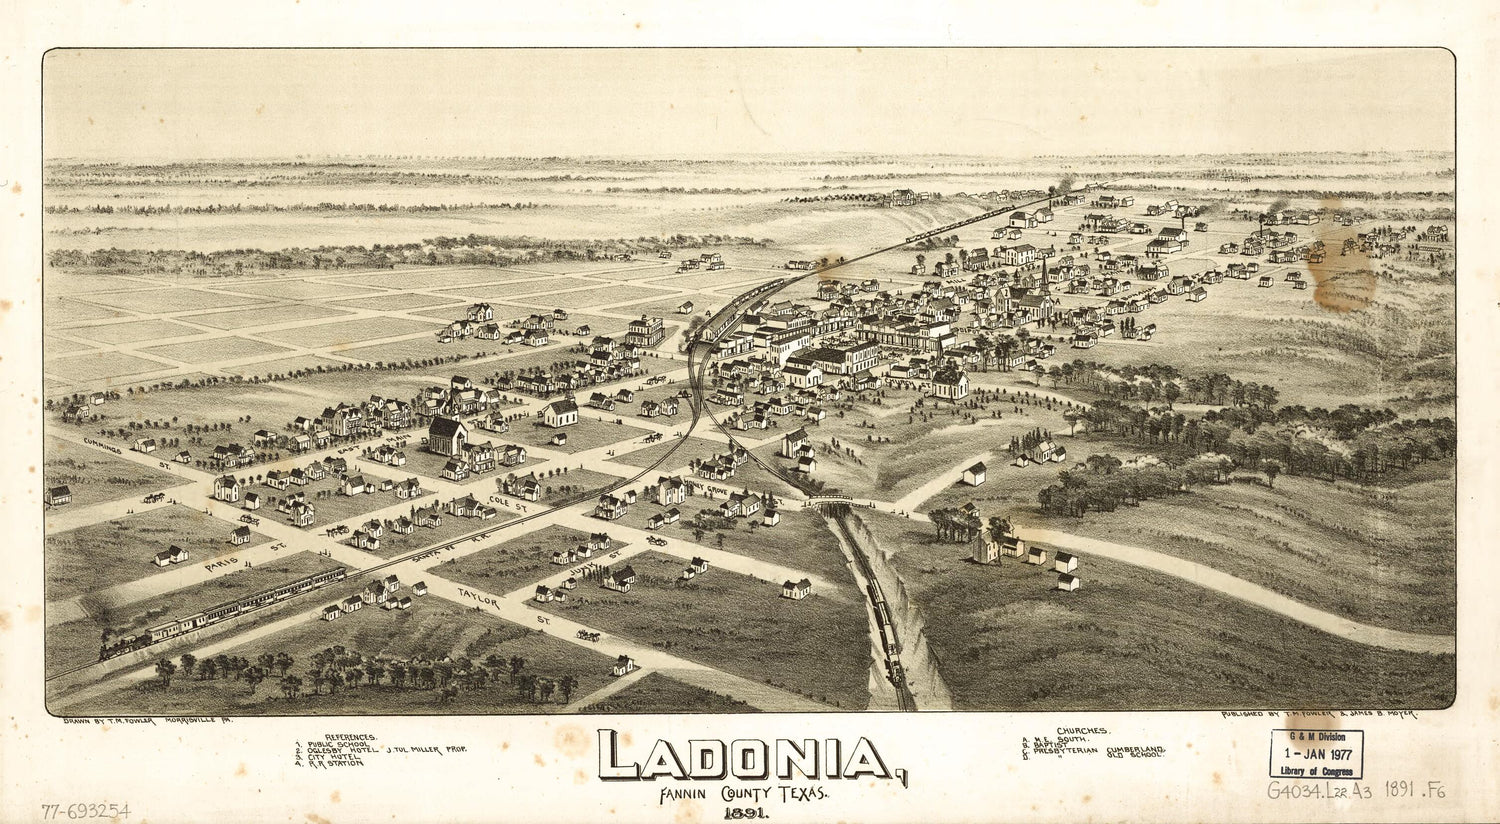 This old map of Ladonia, Fannin County, Texas from 1891 was created by T. M. (Thaddeus Mortimer) Fowler, James B. Moyer in 1891